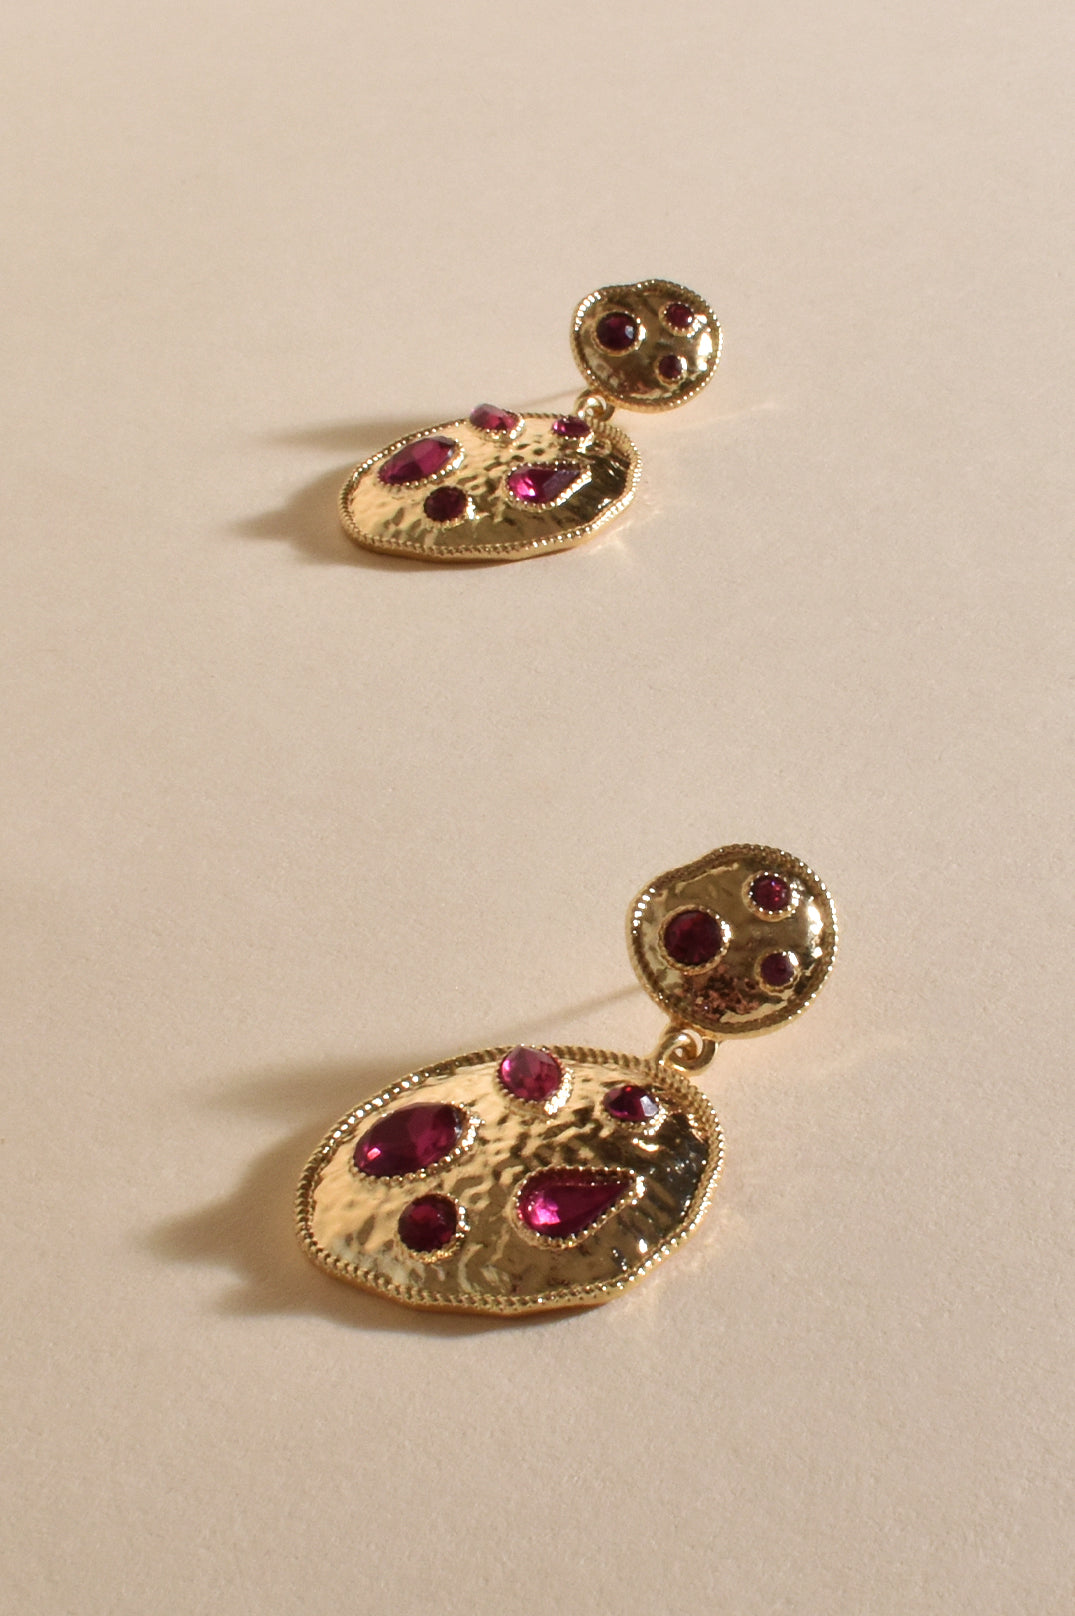 Jeweled Metal Disc Earrings with Magenta stone detail.